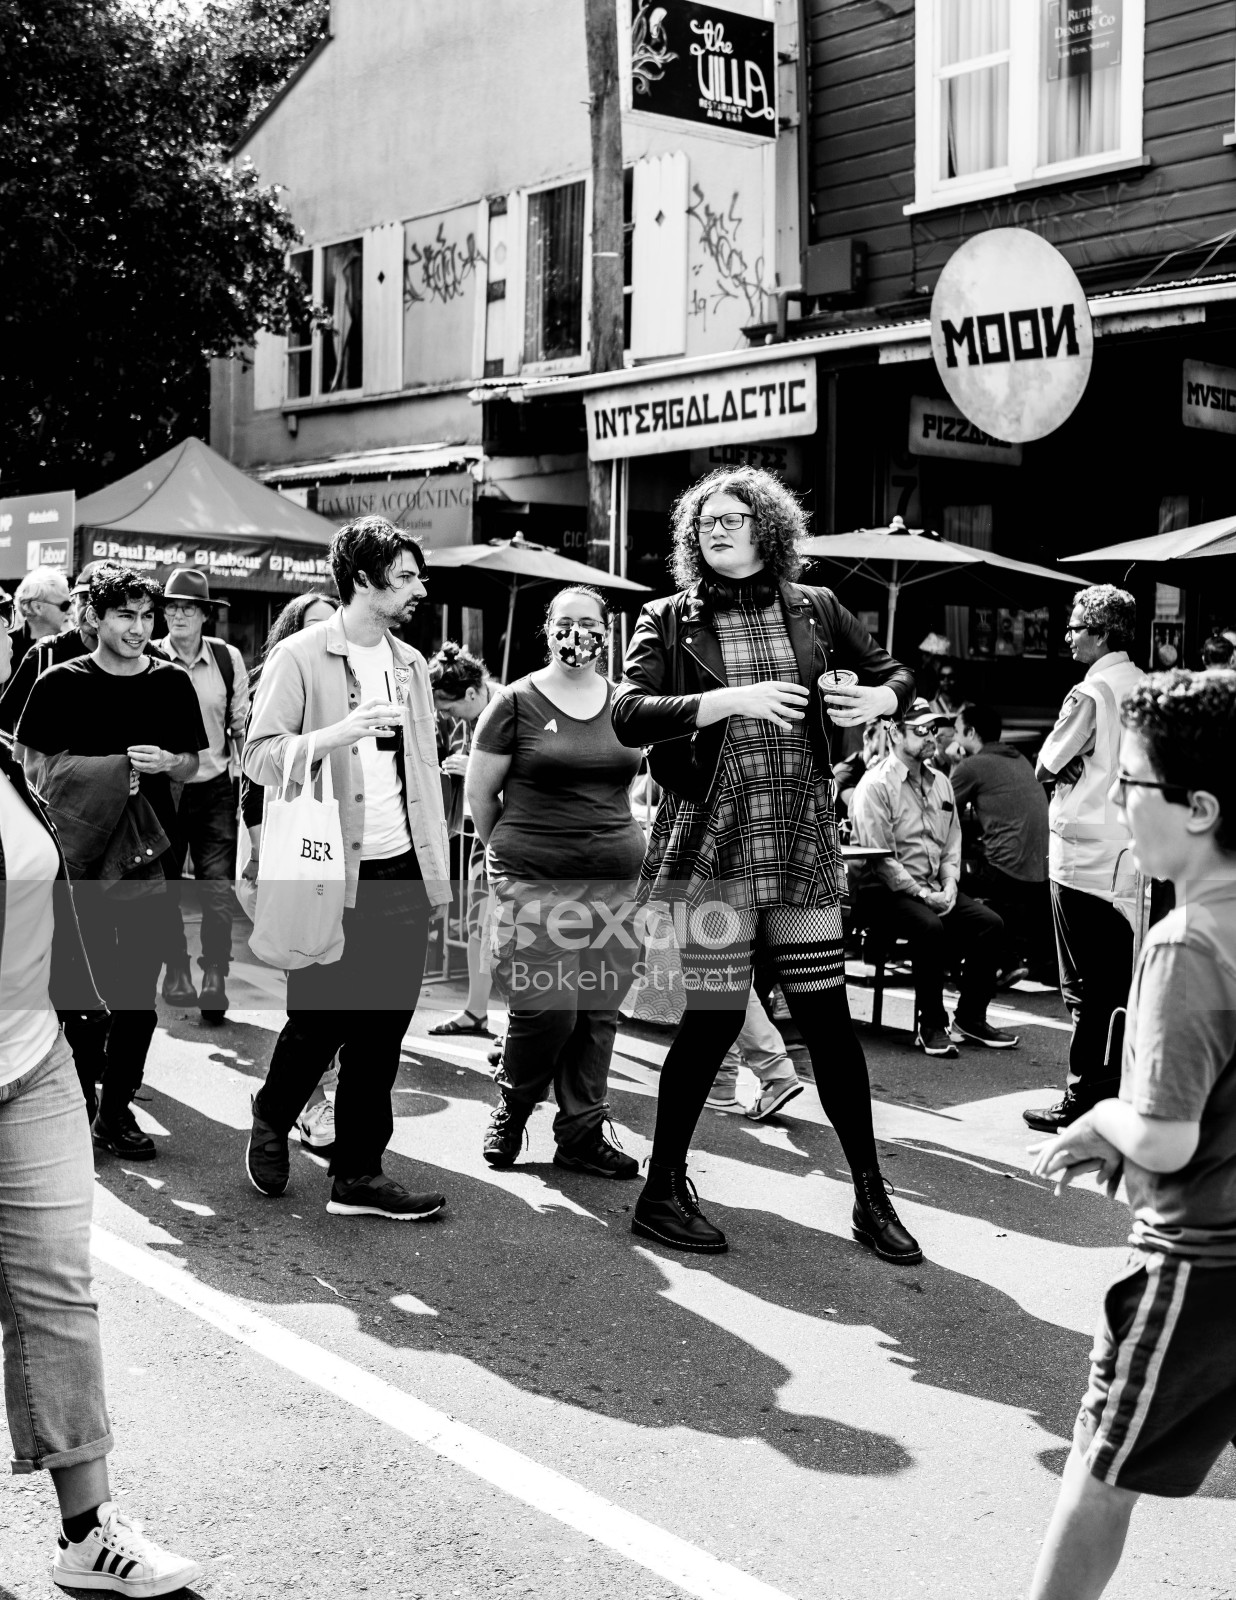 A tall curly haired woman at Newtown festival 2021 black and white